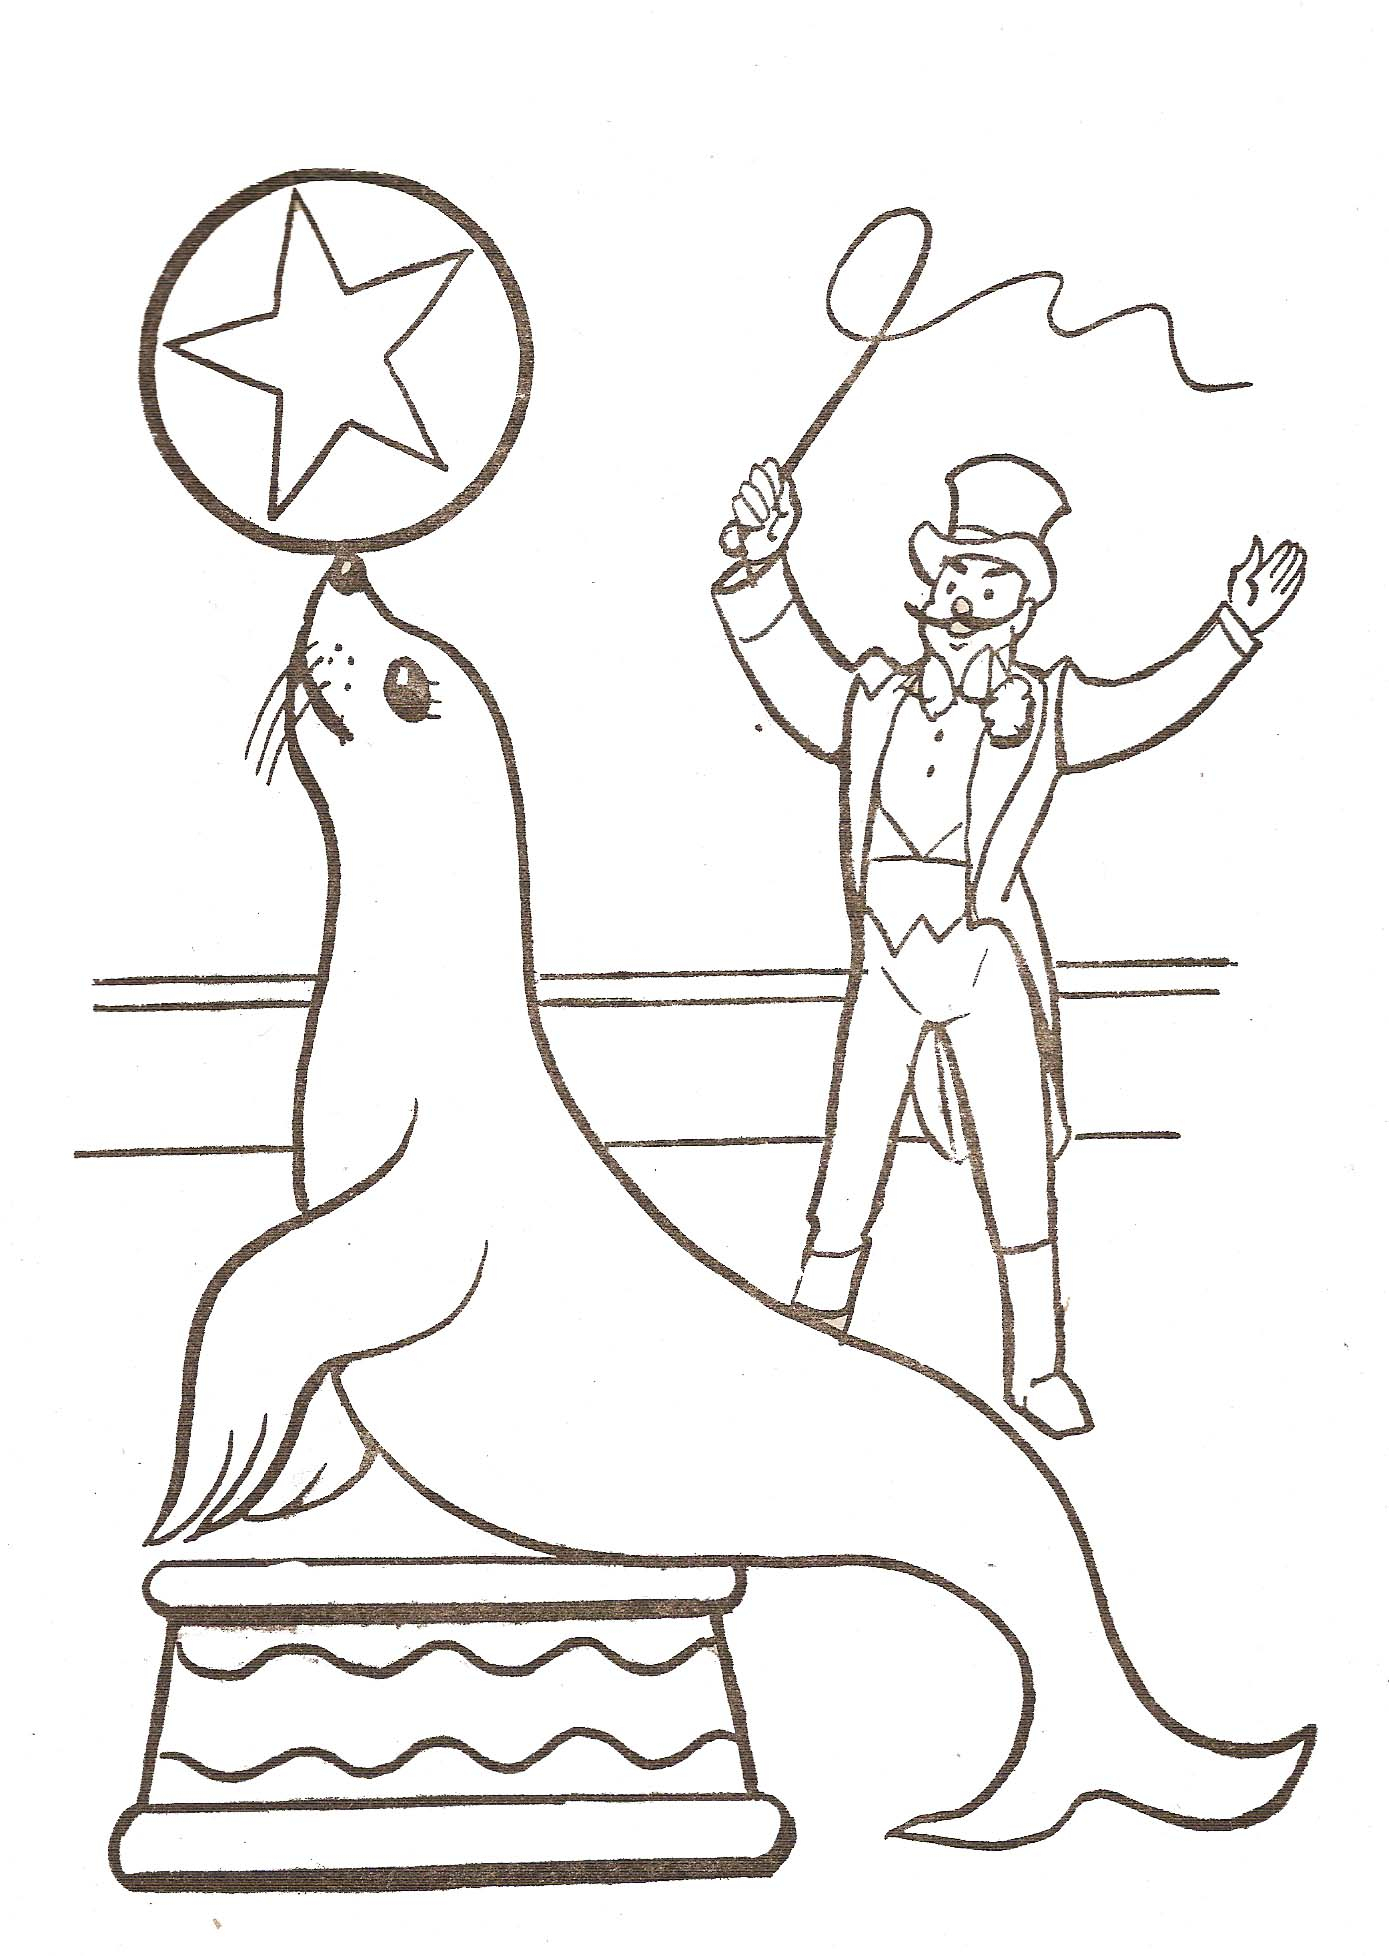 Circus To Download For Free - Circus Kids Coloring Pages destiné Coloriages Cirque